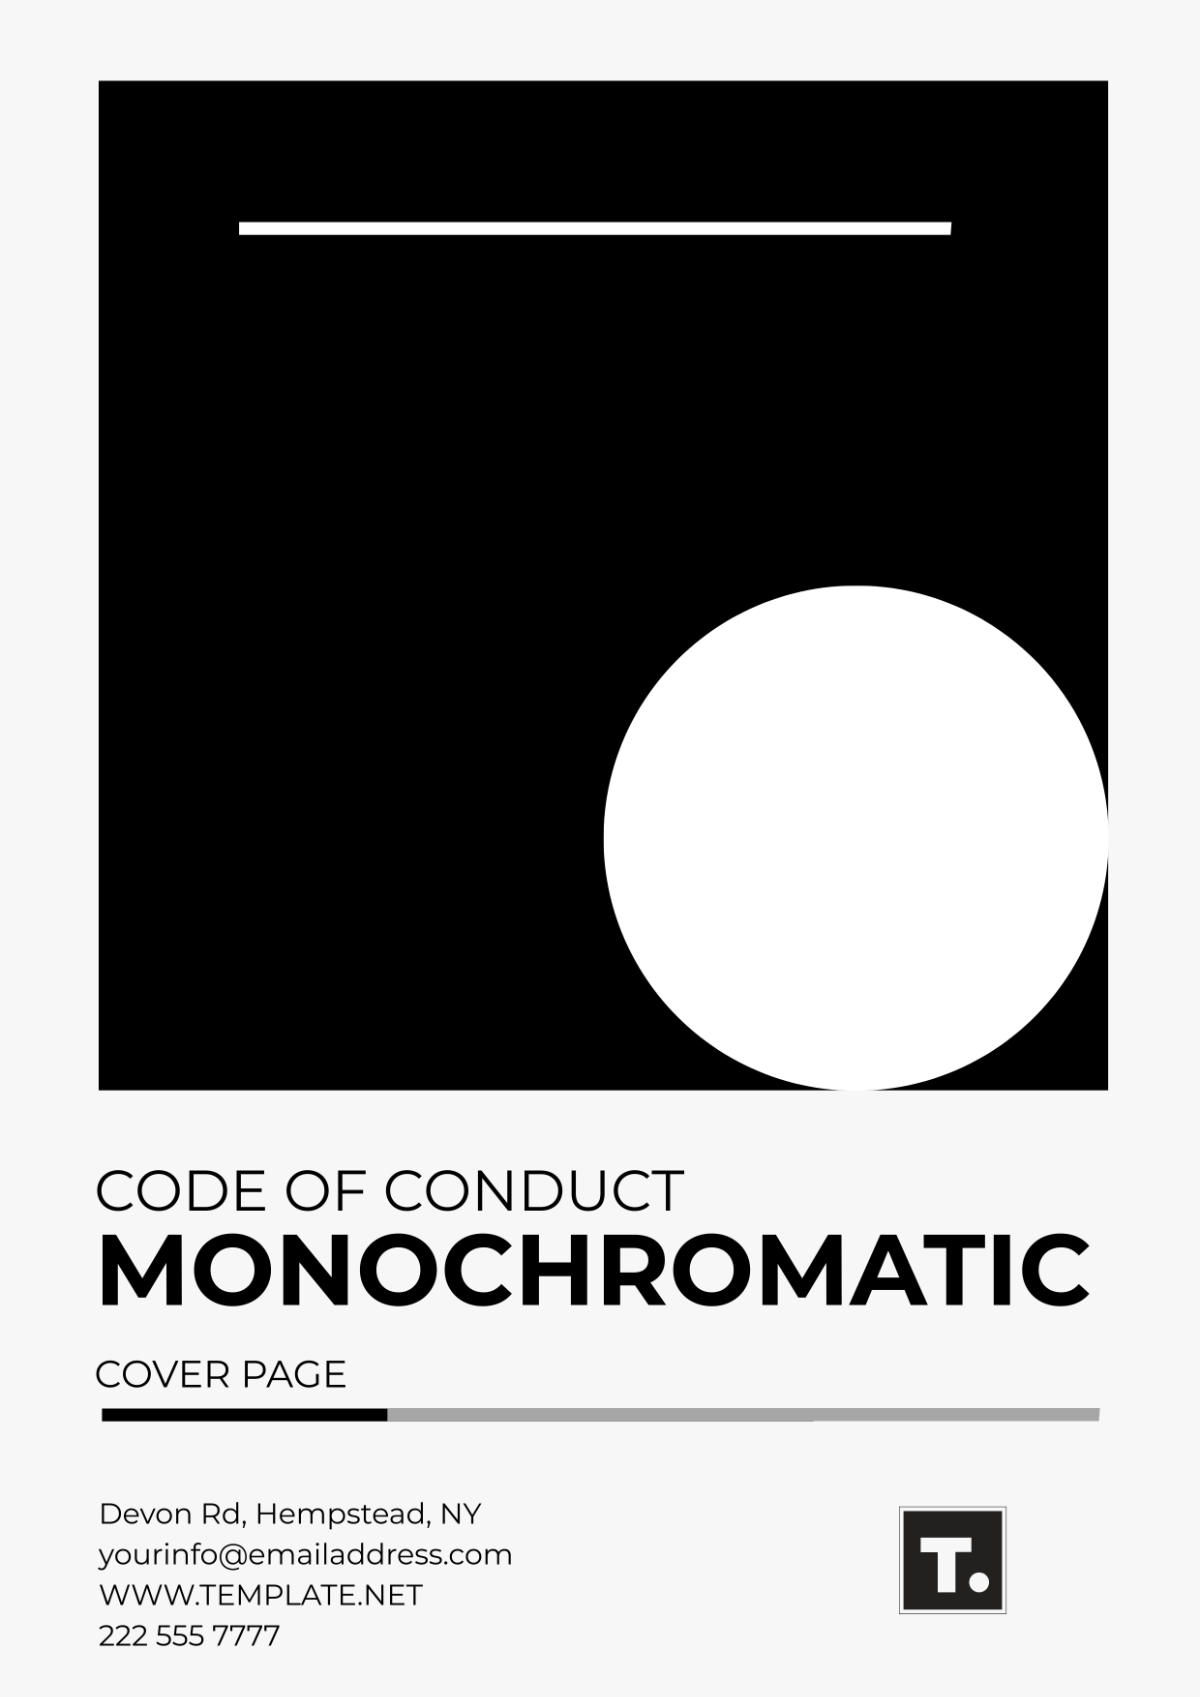 Code of Conduct Monochromatic Cover Page